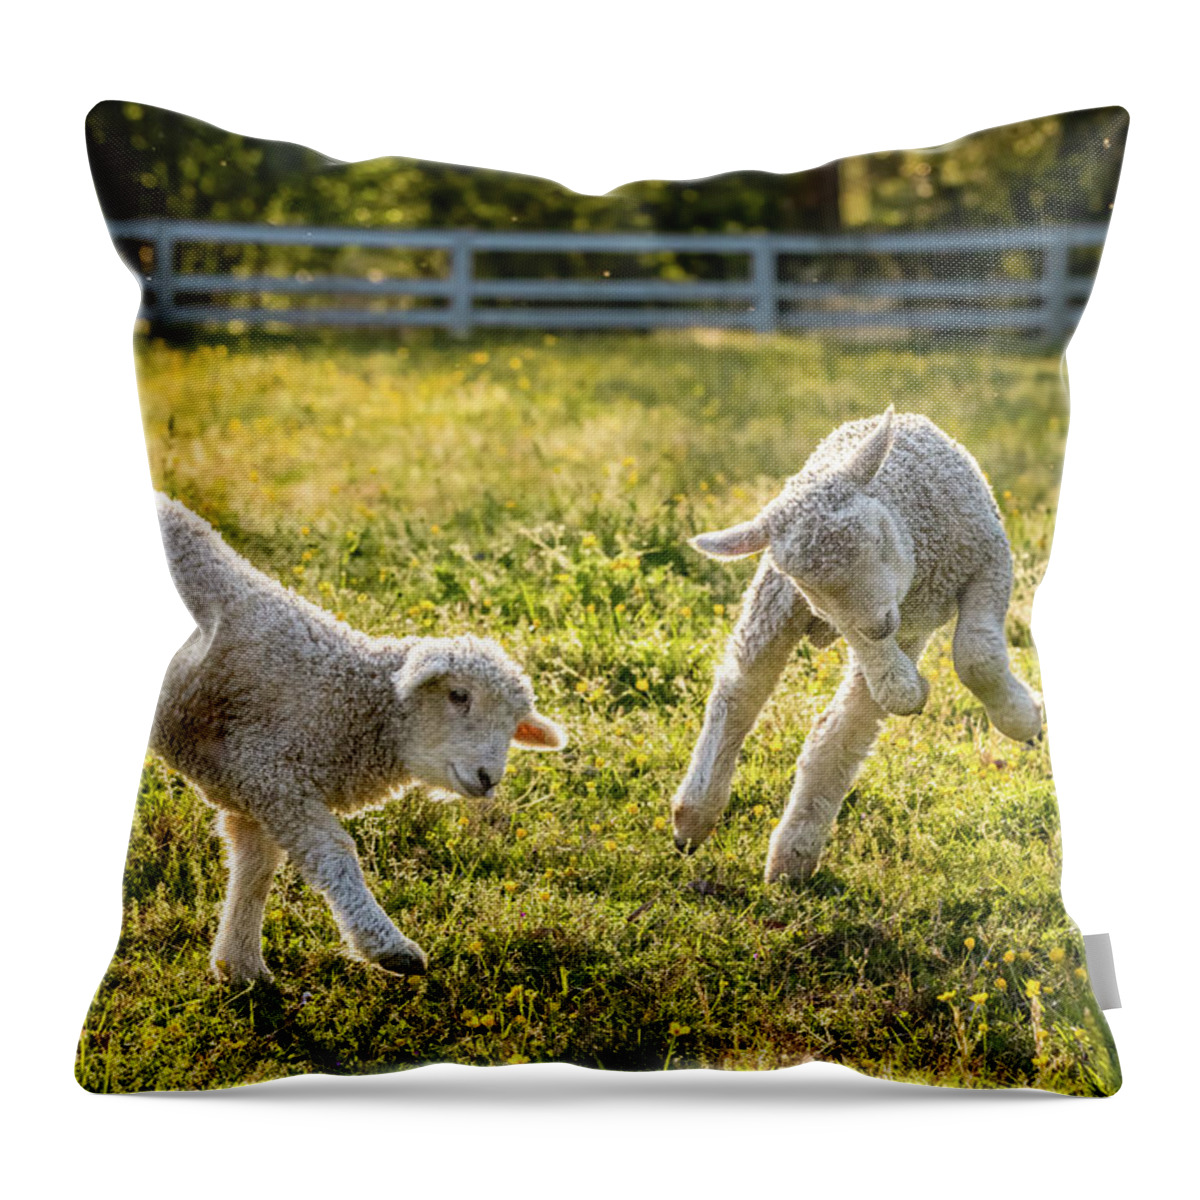 Sheep Throw Pillow featuring the photograph Springing Lambs by Lara Morrison